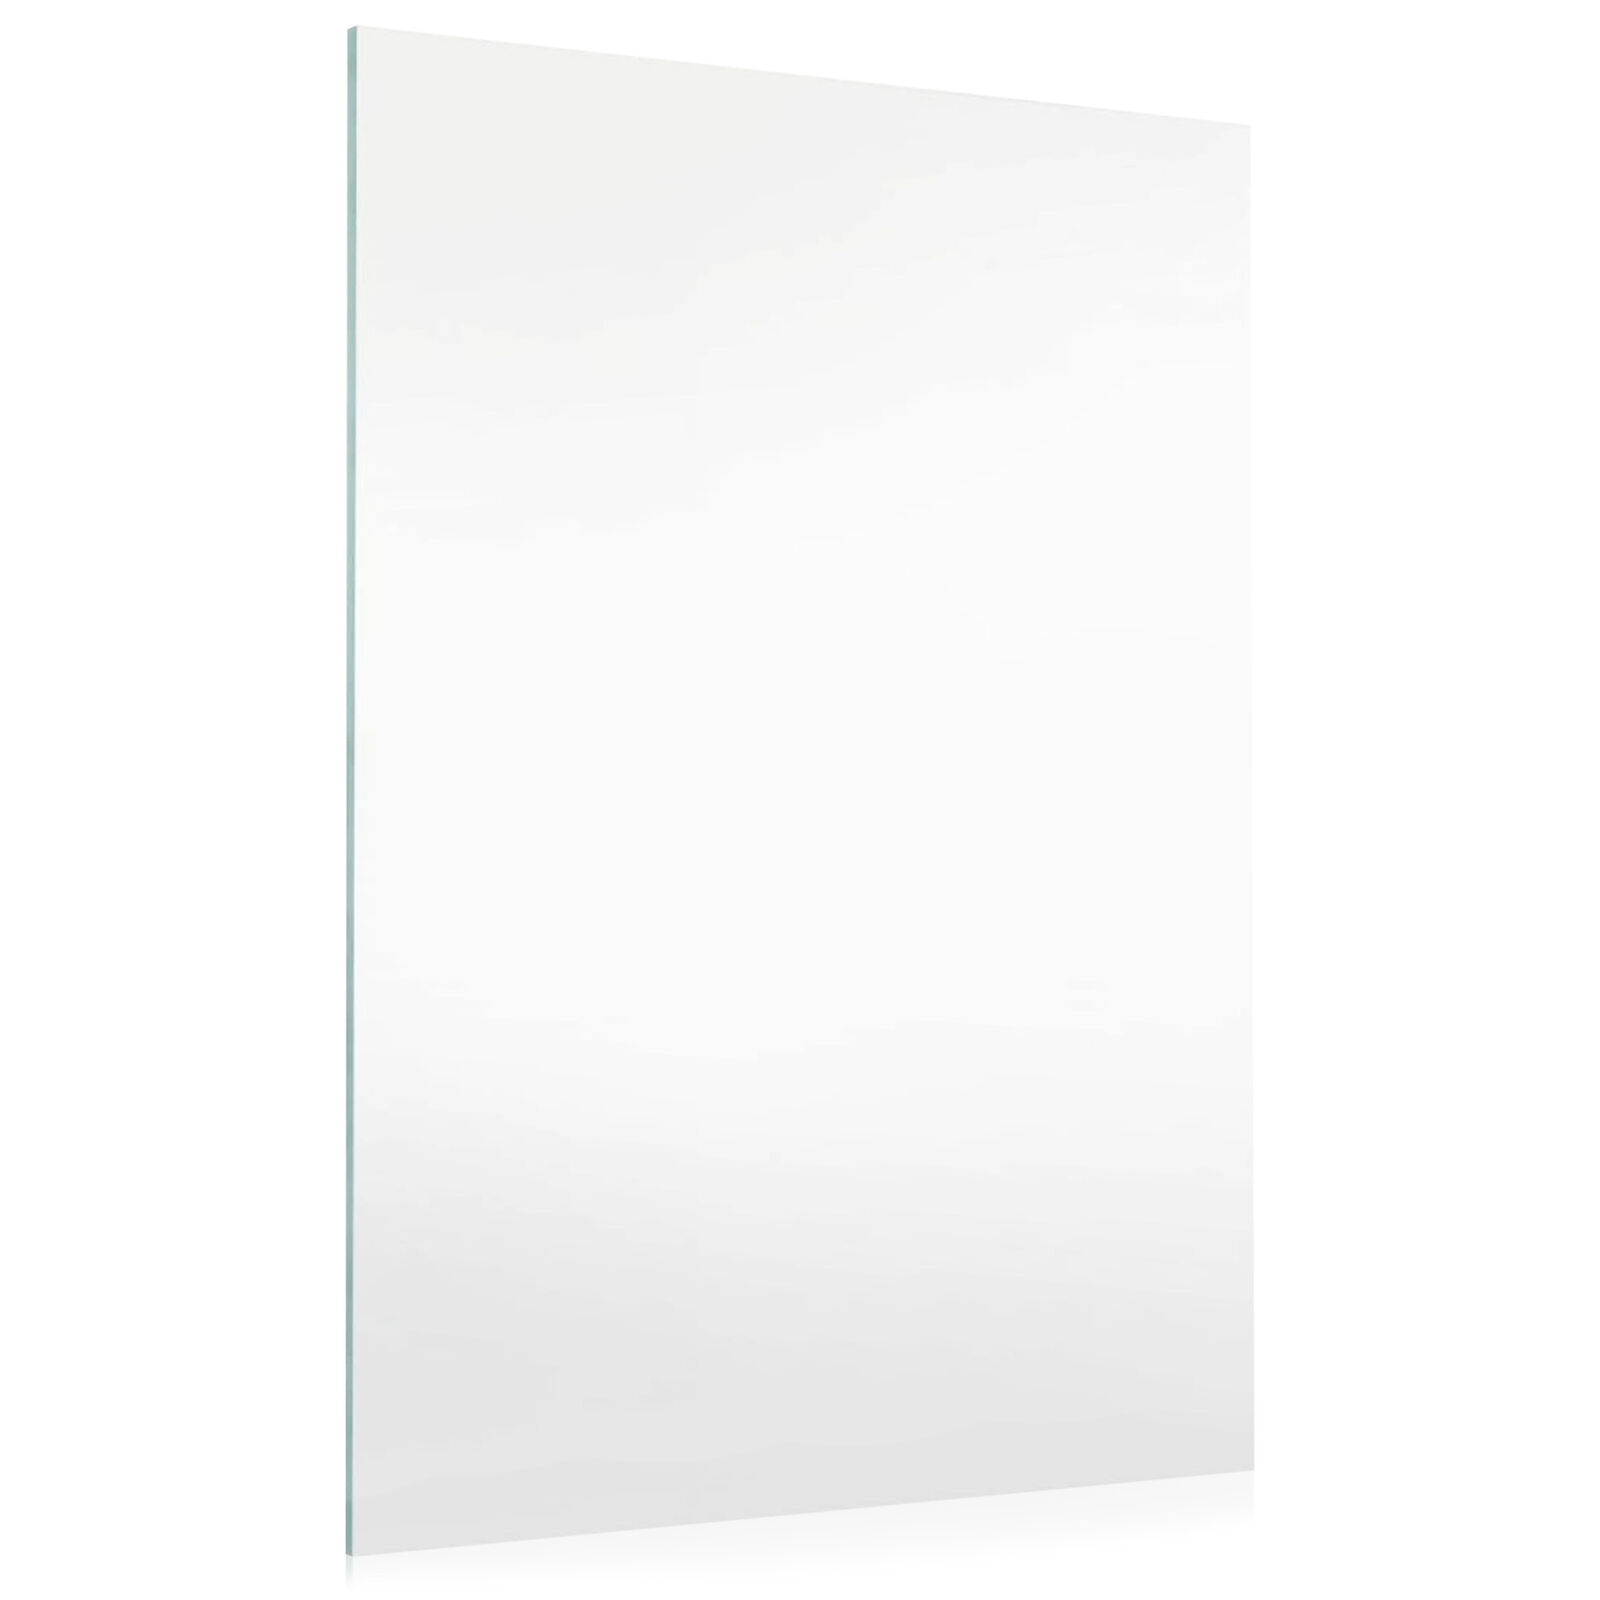 Non-Glare Uv-Resistant Frame-Grade Acrylic Replacement For 8x8 Picture Frame